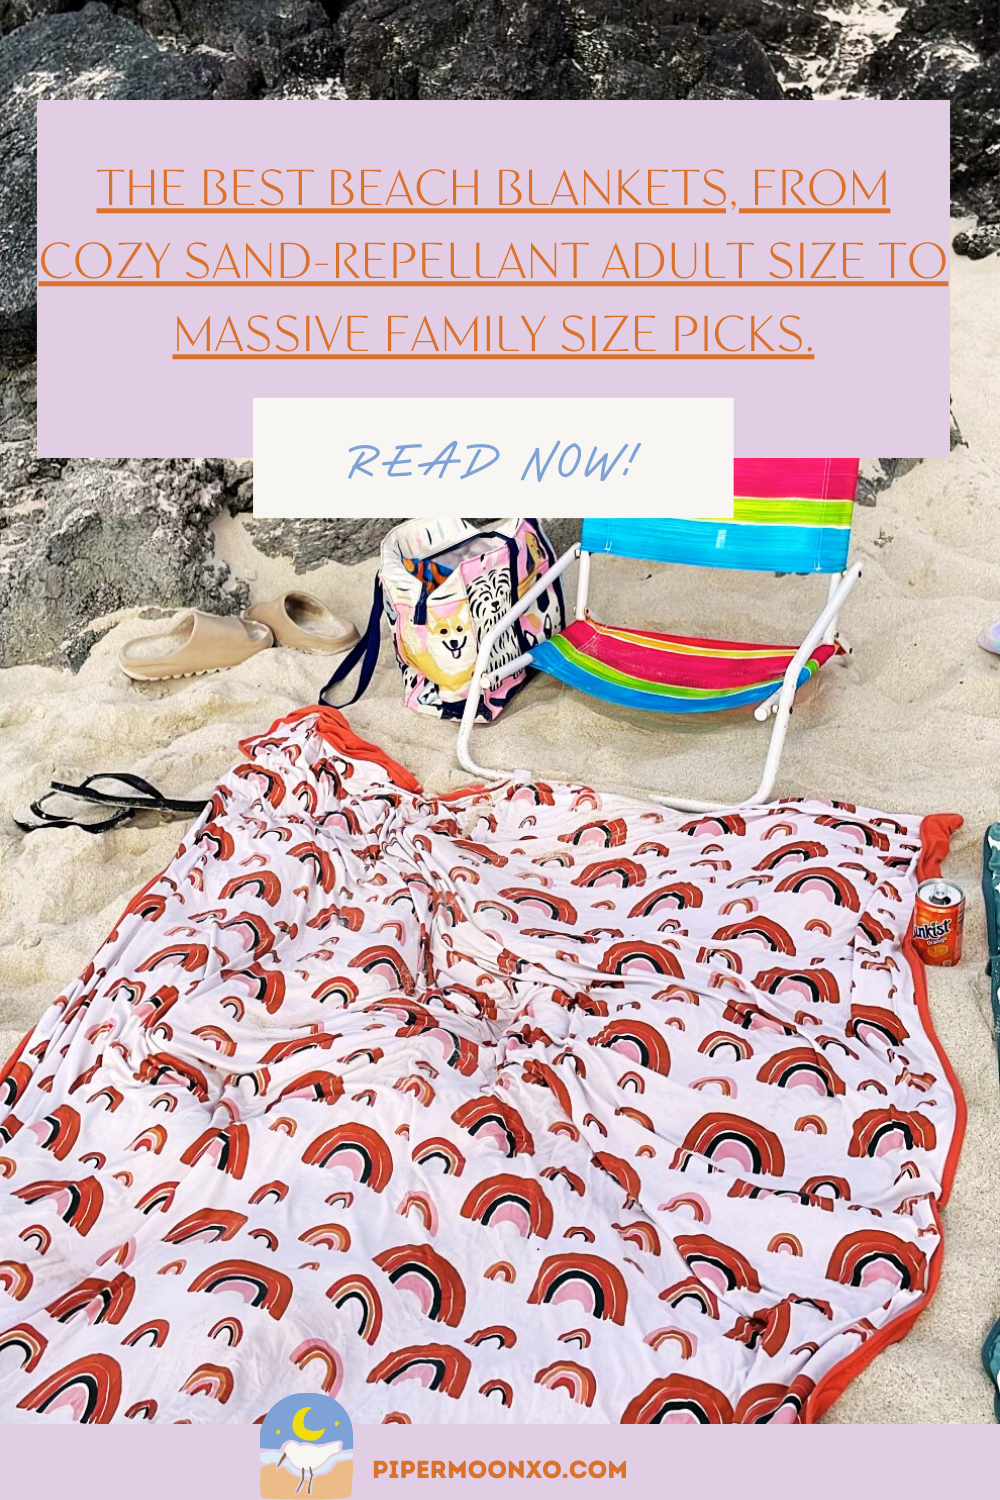 The Best Beach Blankets, From Cozy Sand-repellant Adult Size  to Massive Family Size Picks.